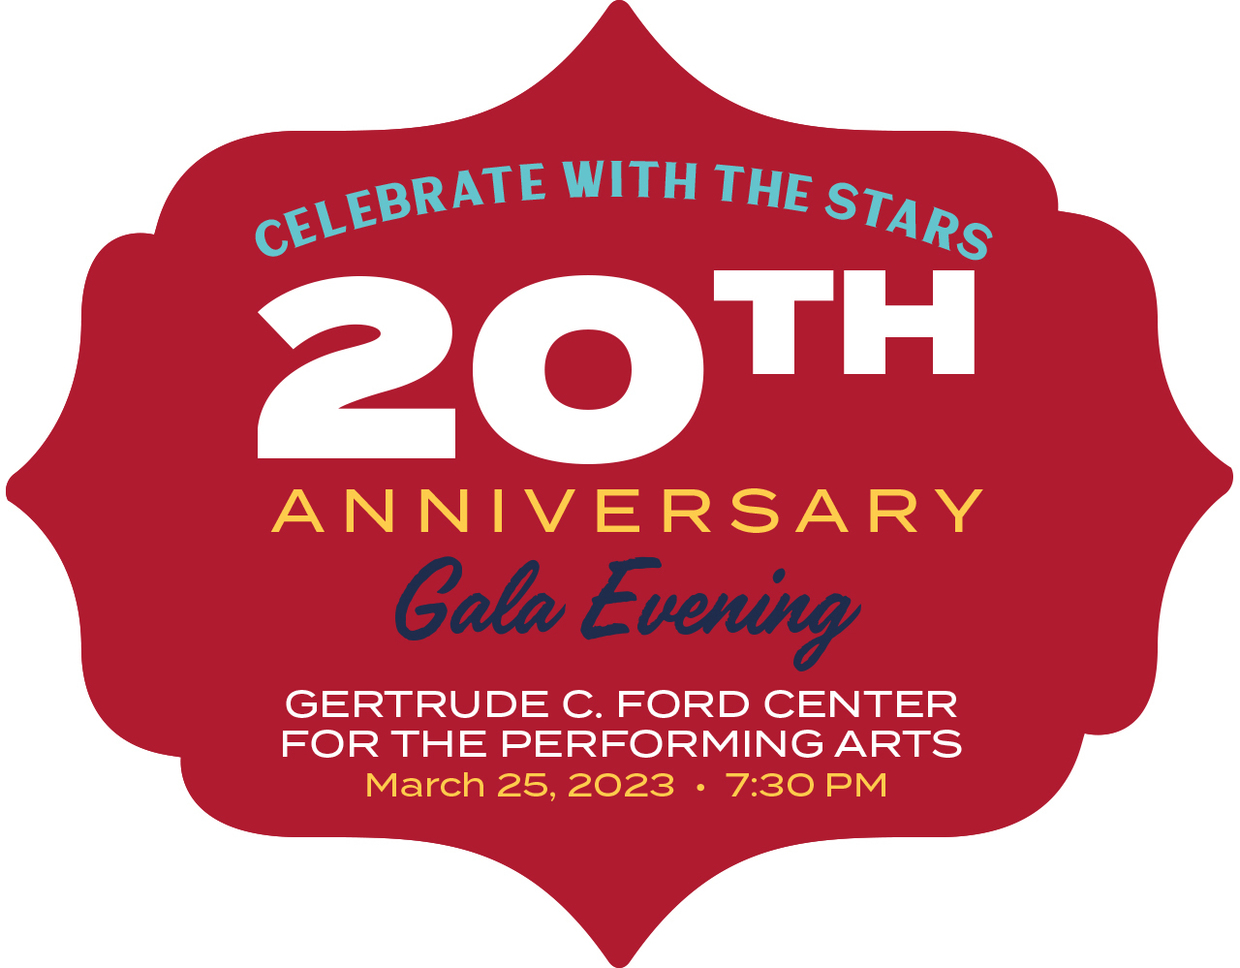 Celebrate with the Stars 20th Anniversary Gala Evening Gertrude C. Ford Center for the Performing Arts, March 25, 2023, 7:30 PM*